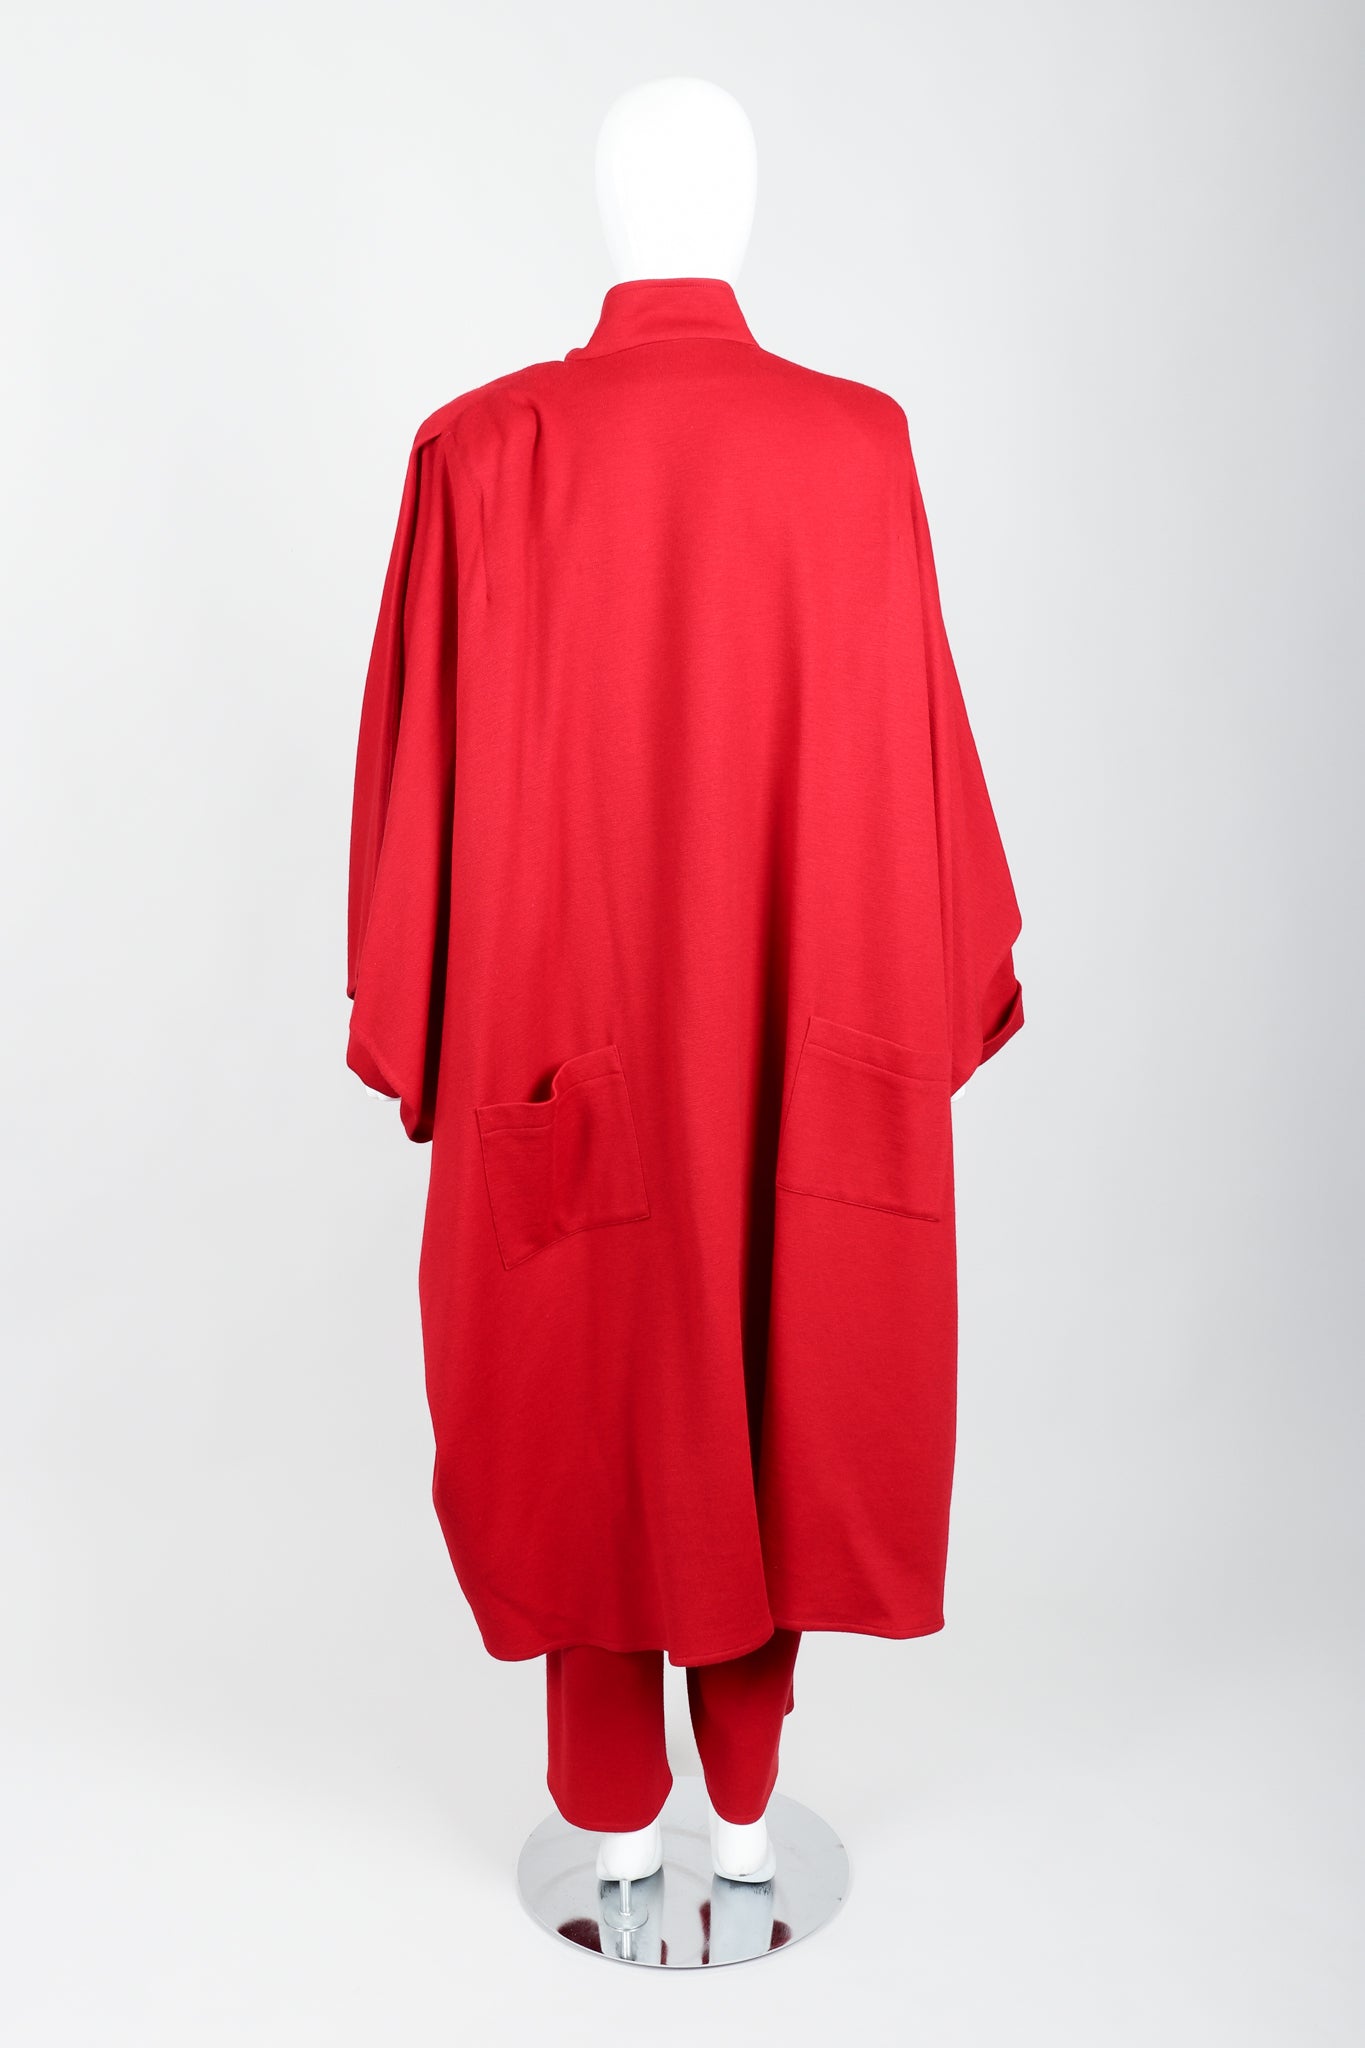 Vintage Sonia Rykiel Red Knit Cape Coat & Pant Set on mannequin back at Recess